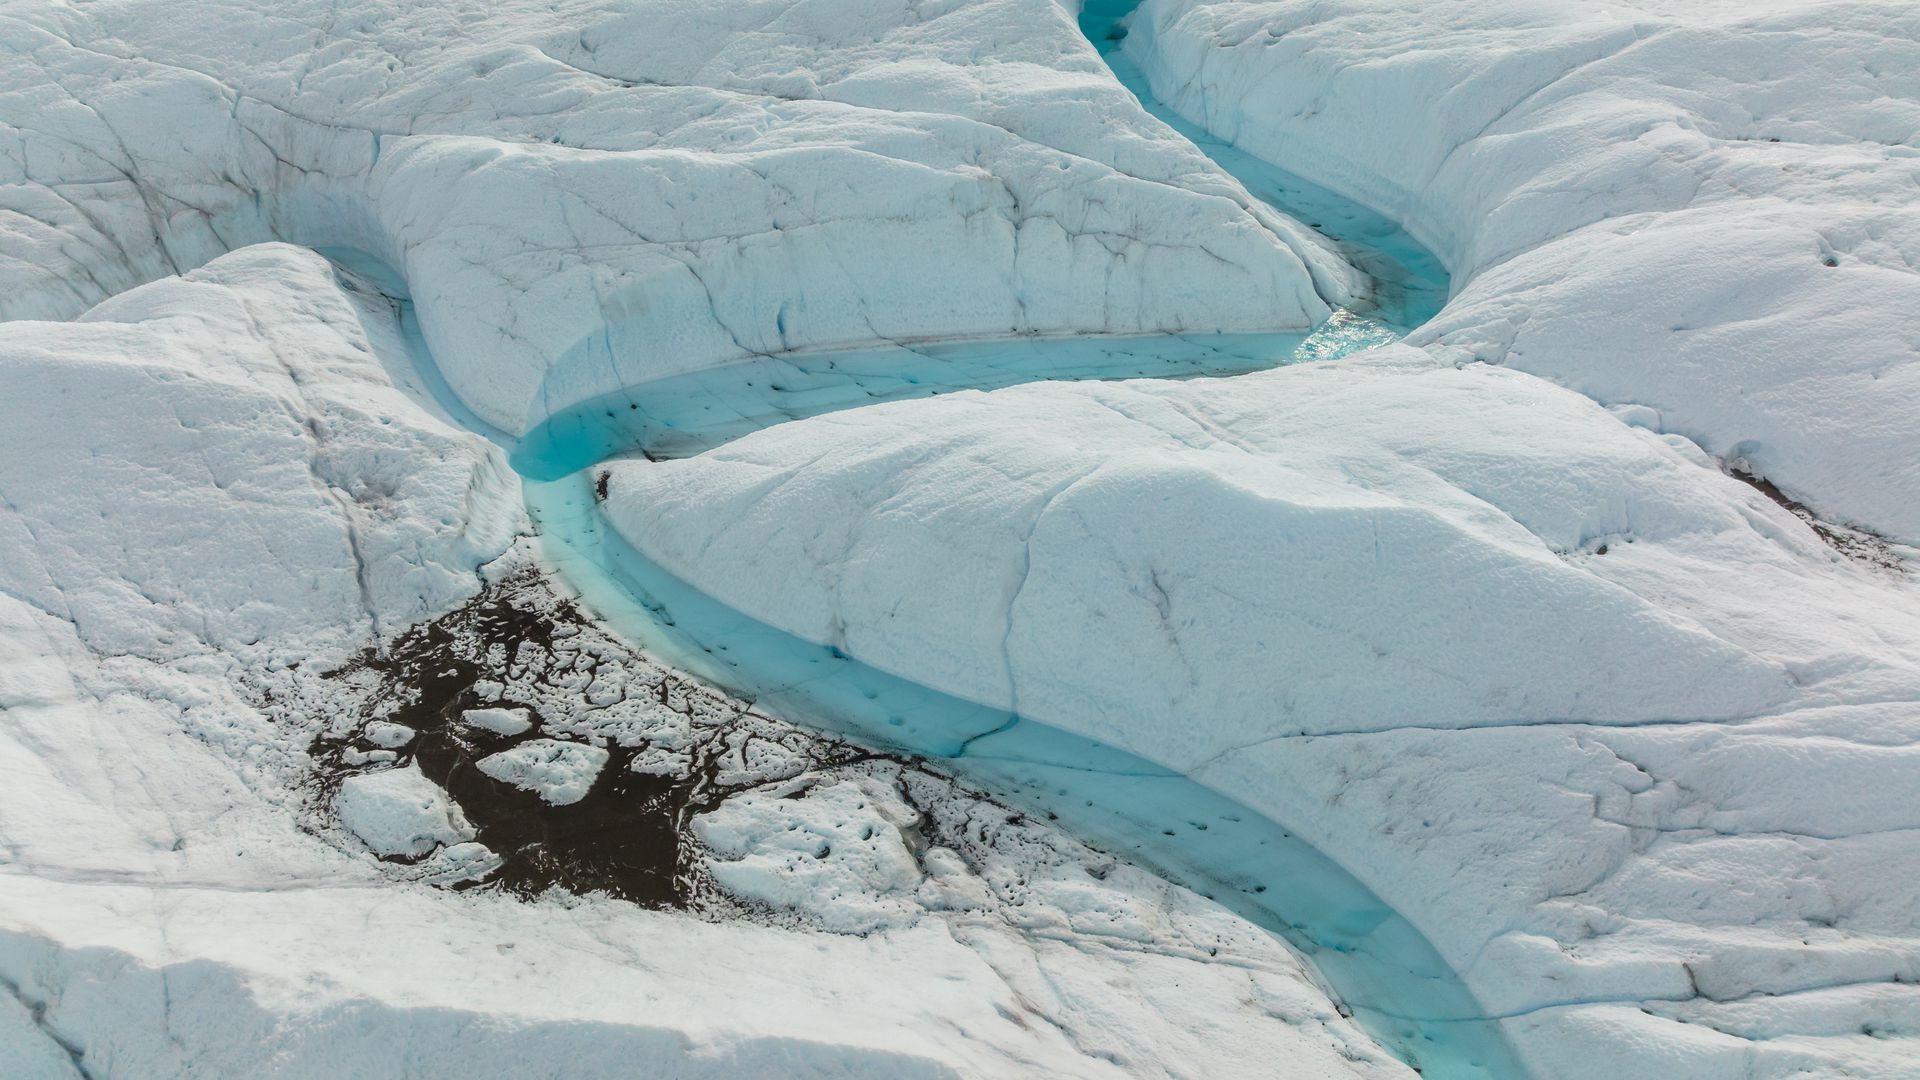 An aerial view of meltwater on the Russell Glacier in Greenland on Aug. 16, 2022. Photo: Lukasz Larsson Warzecha/Getty Images